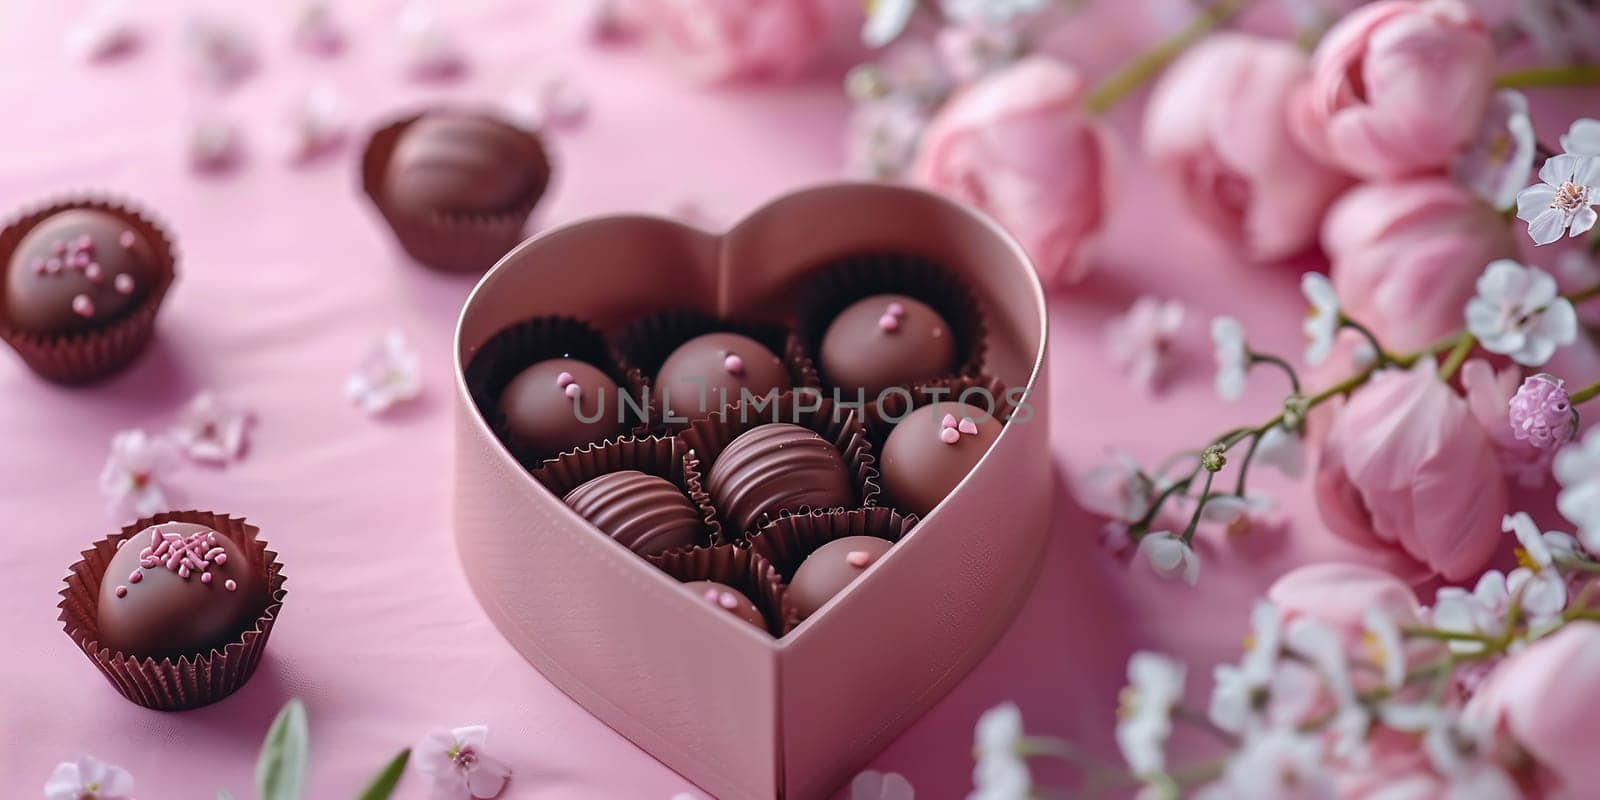 Luxury box of handmade chocolates with rose. Gift concept. High quality photo